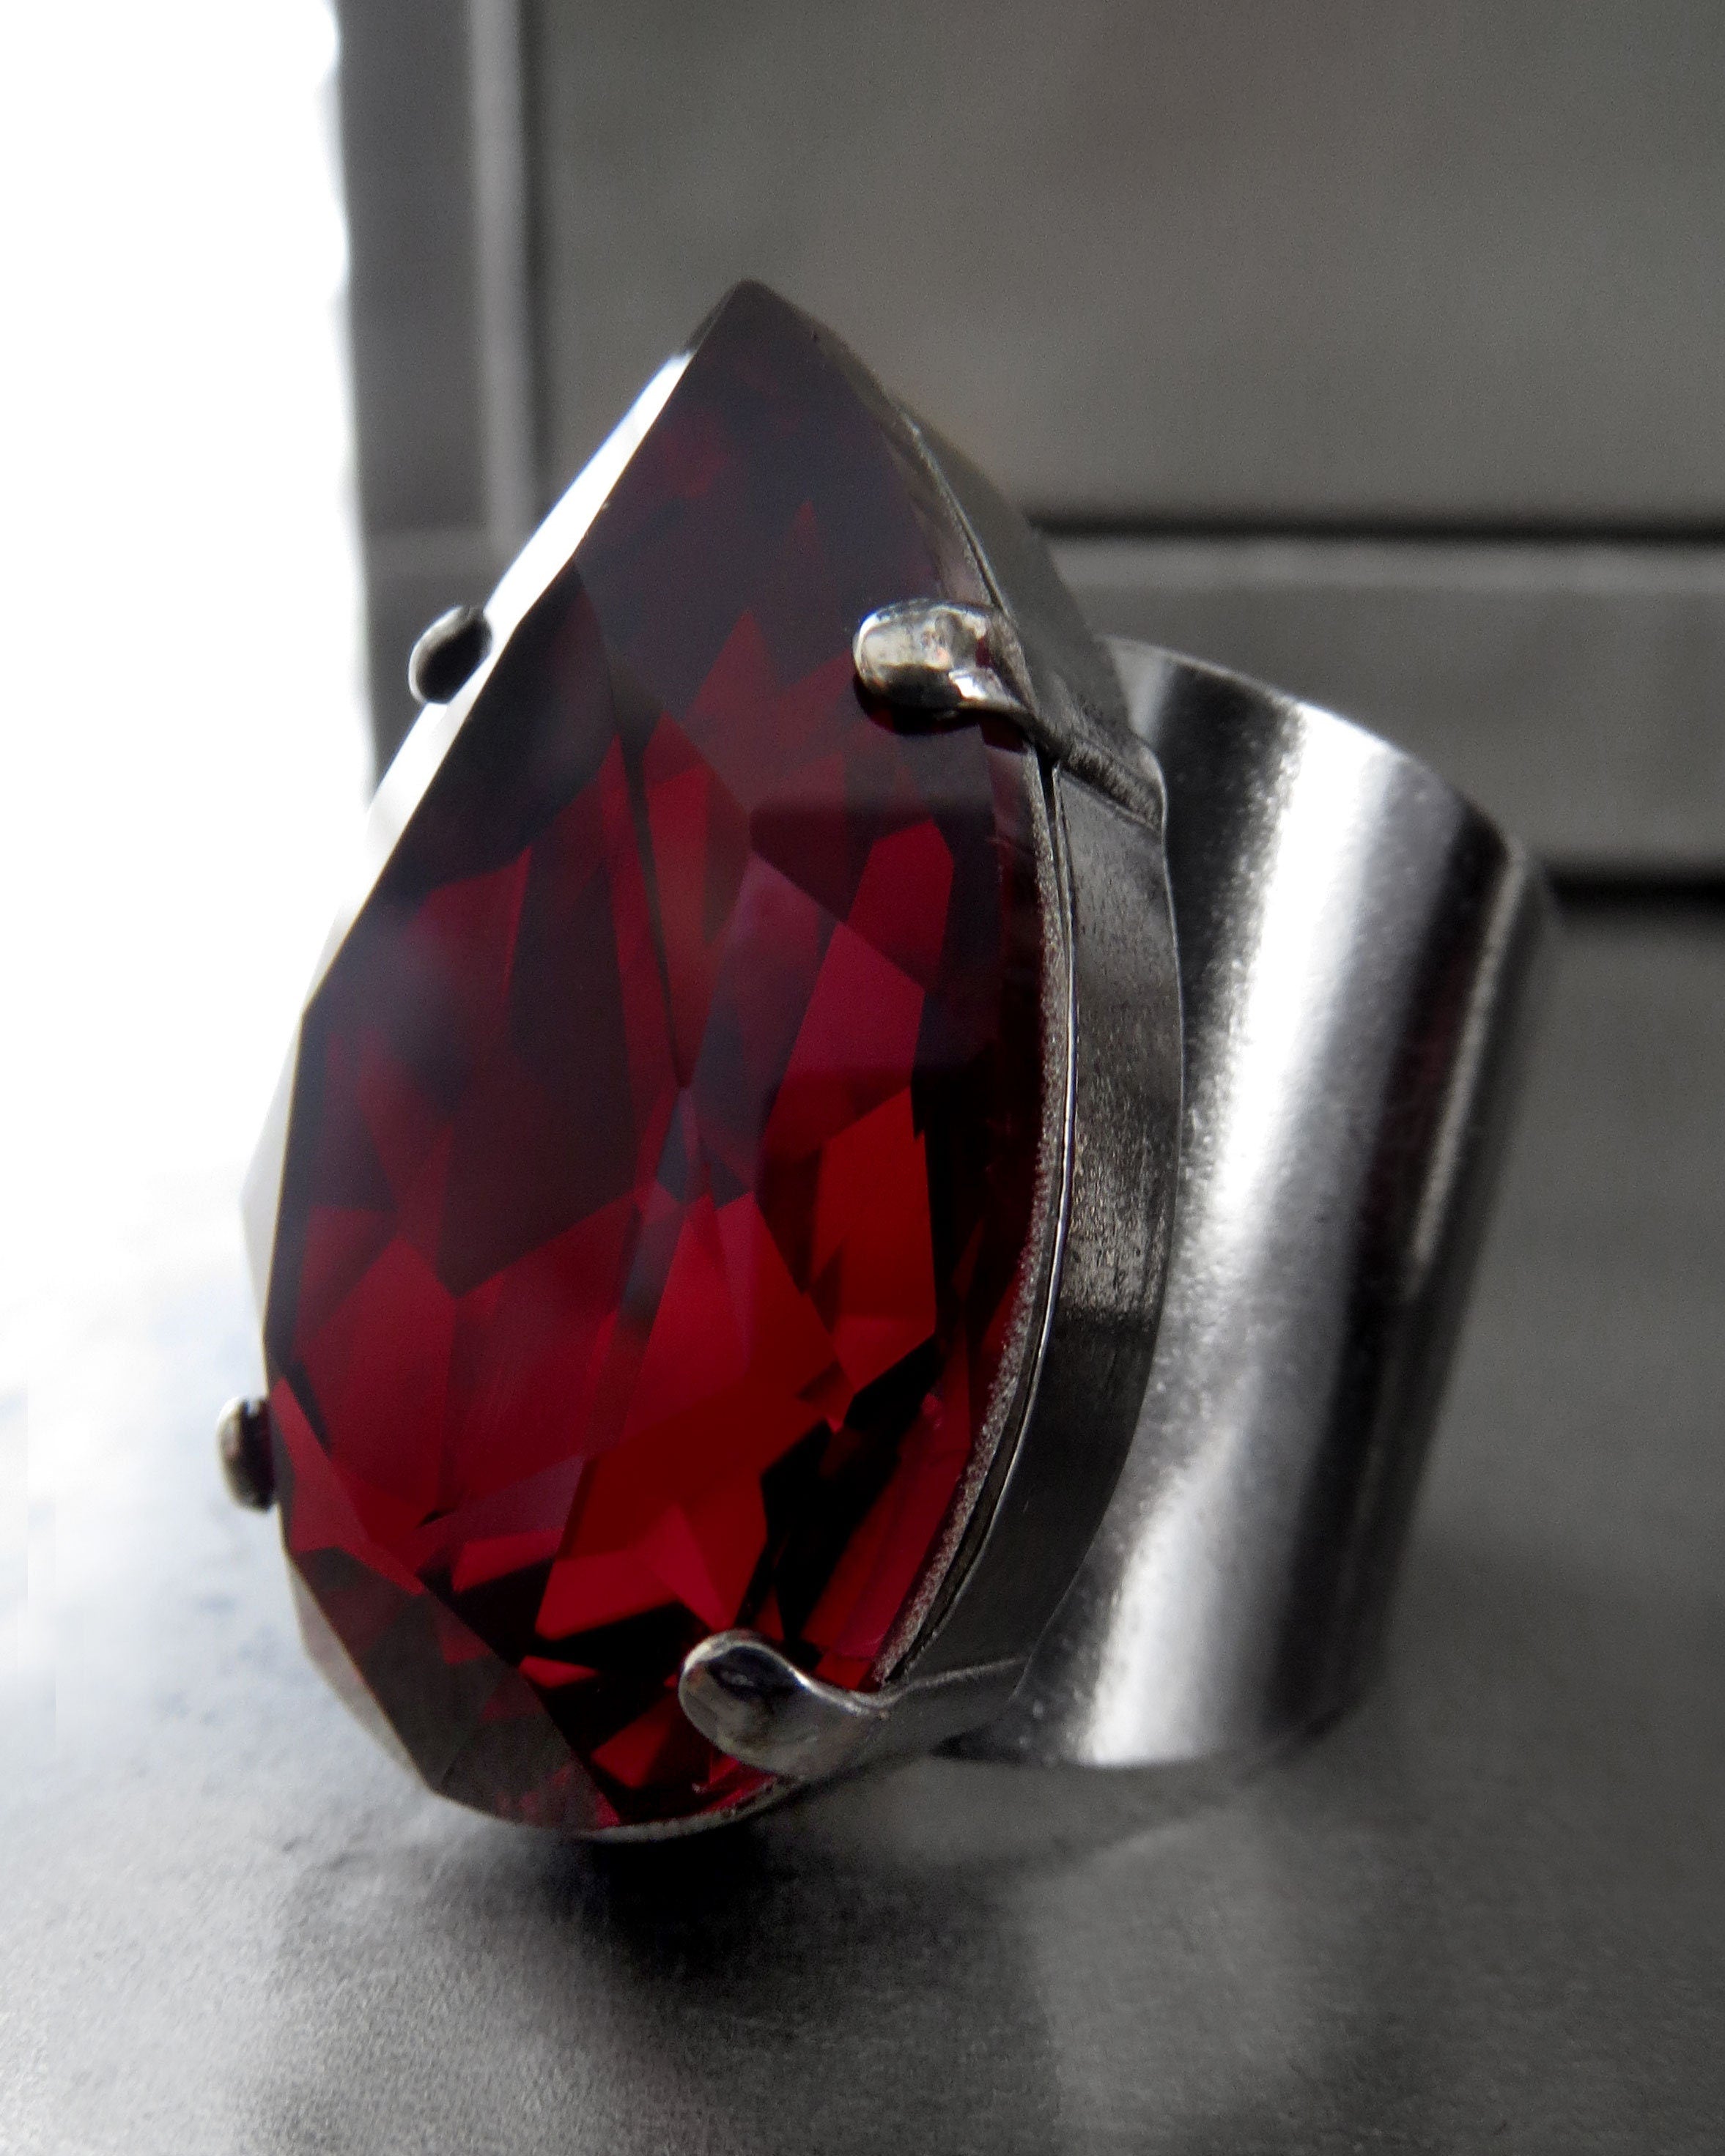 BLOOD RED  - Red Crystal Ring, Unisex Gothic Teardrop Green Crystal Ring w Silver or Black Adjustable Band, Goth Halloween Jewelry